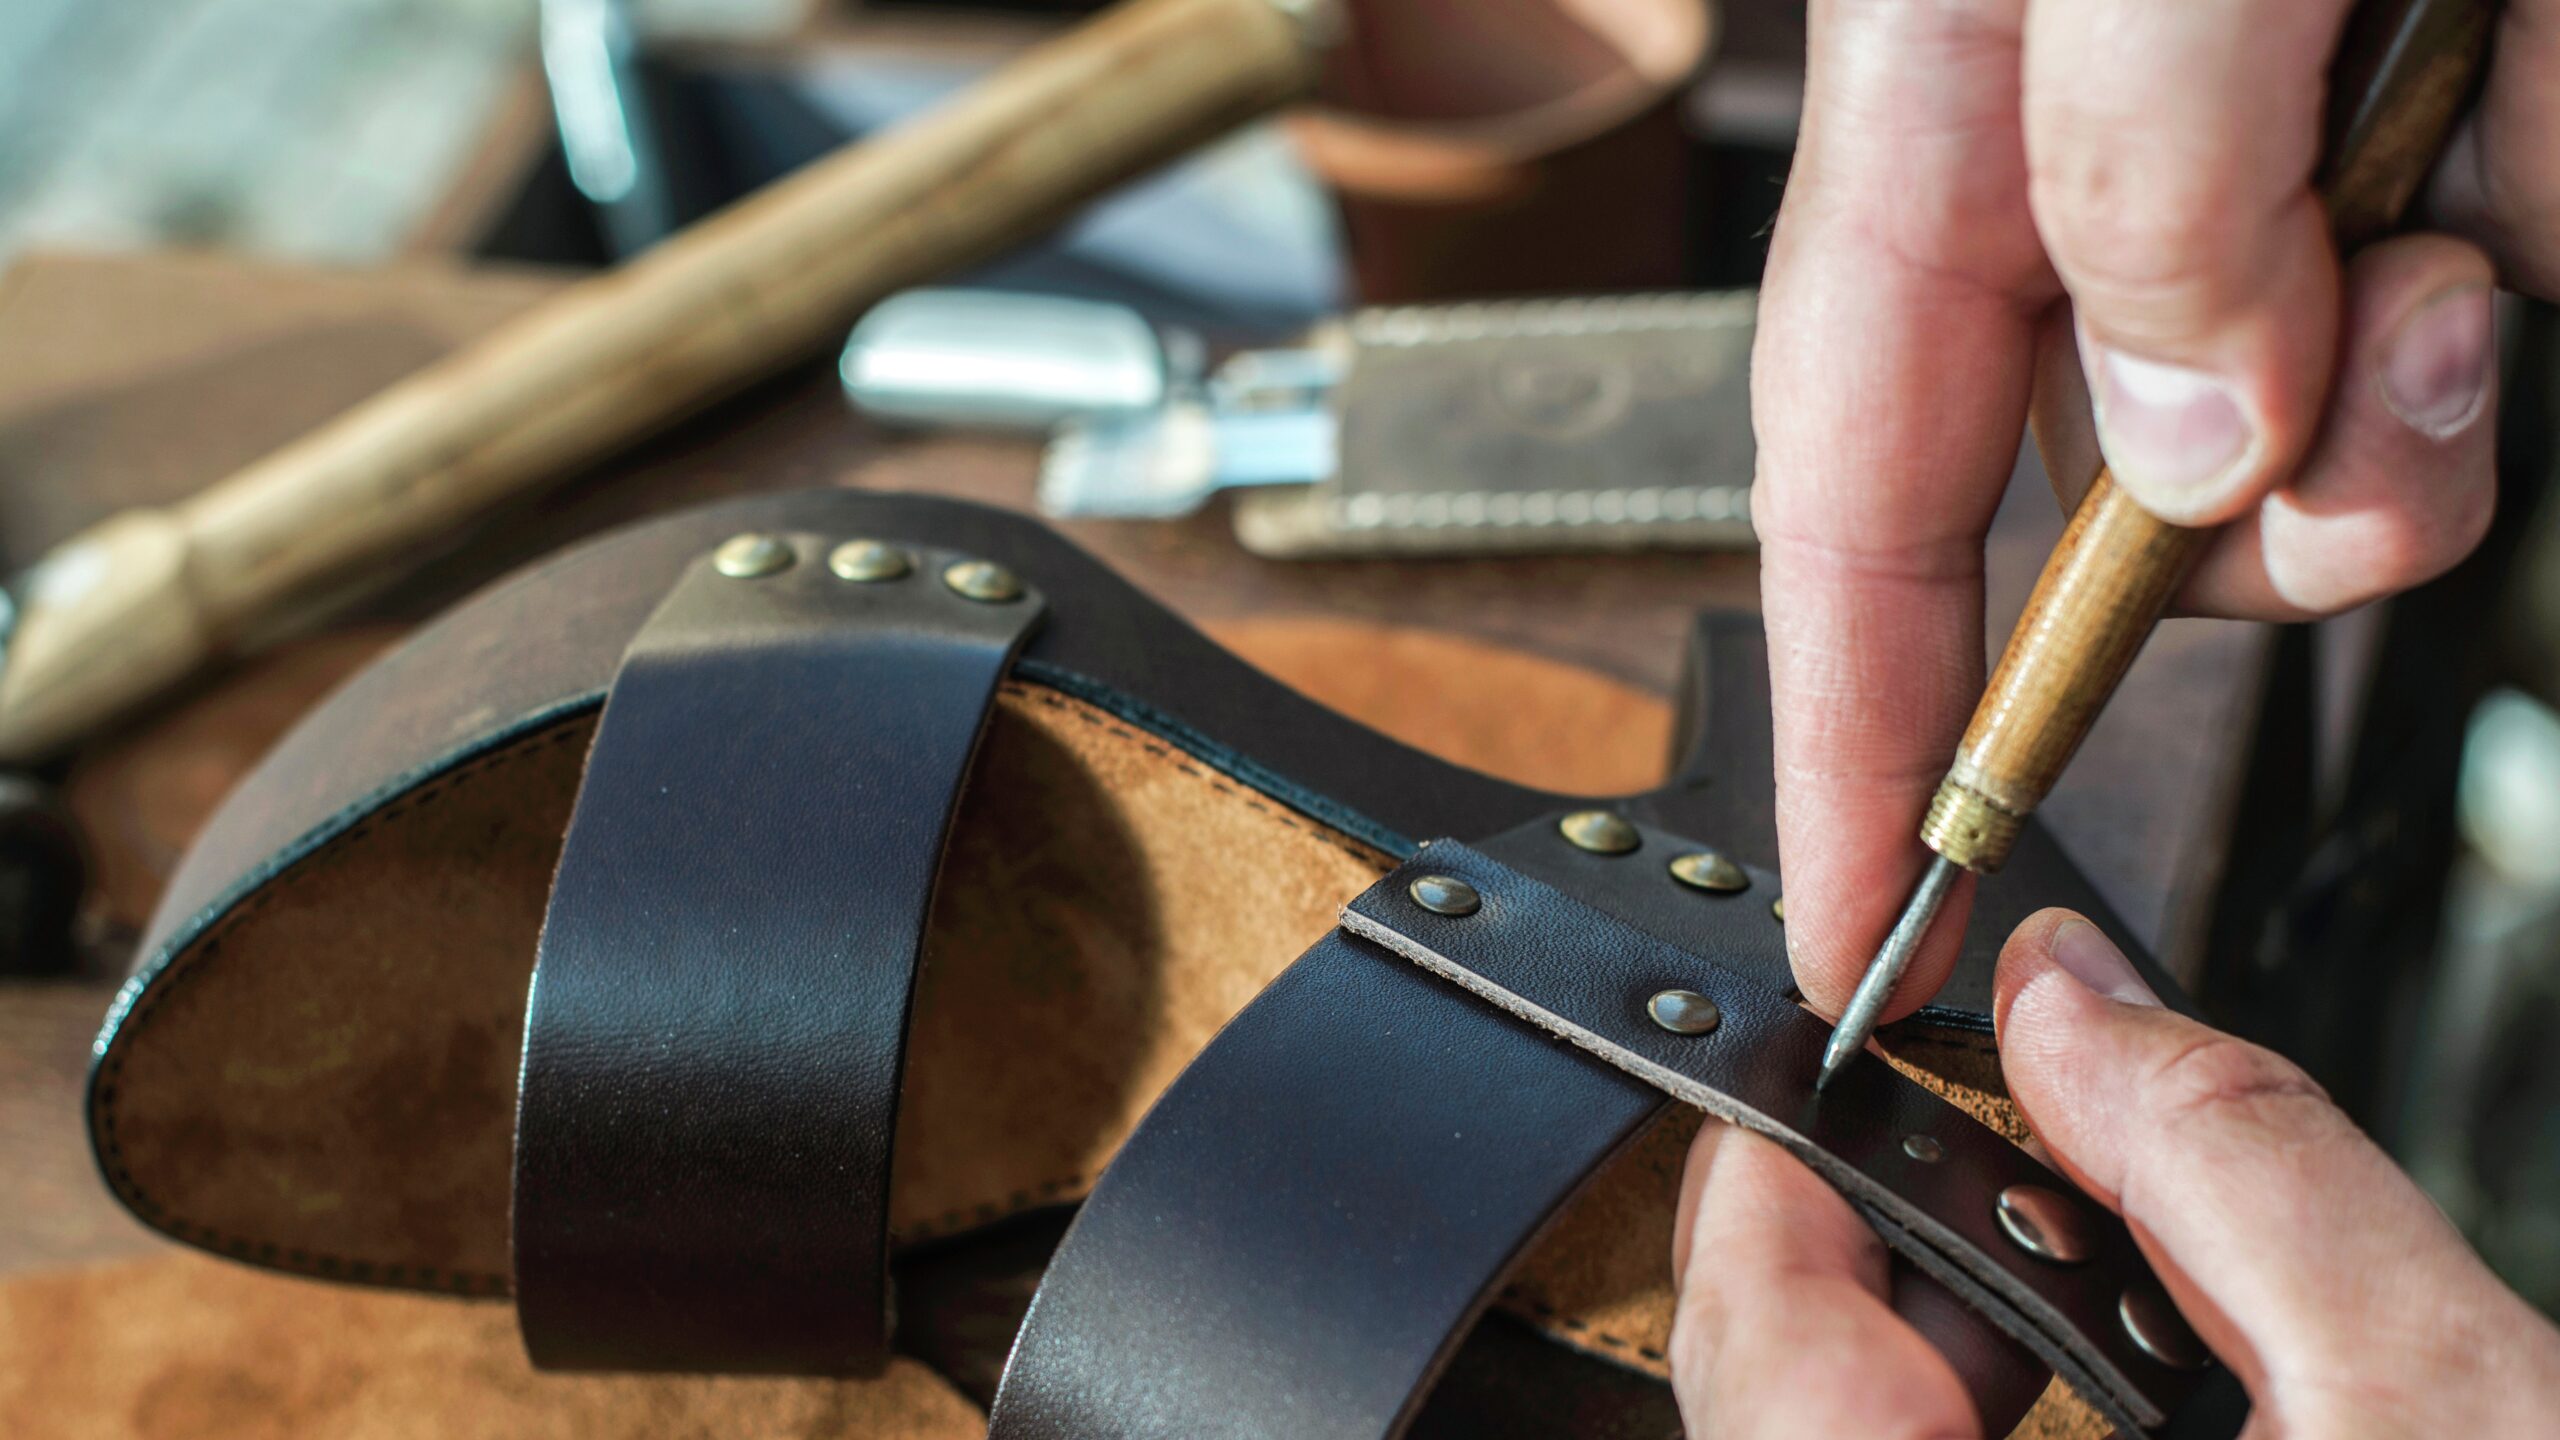 Mendfulness – How Repairing Luxury Goods Can Be Better Than Buying New Ones